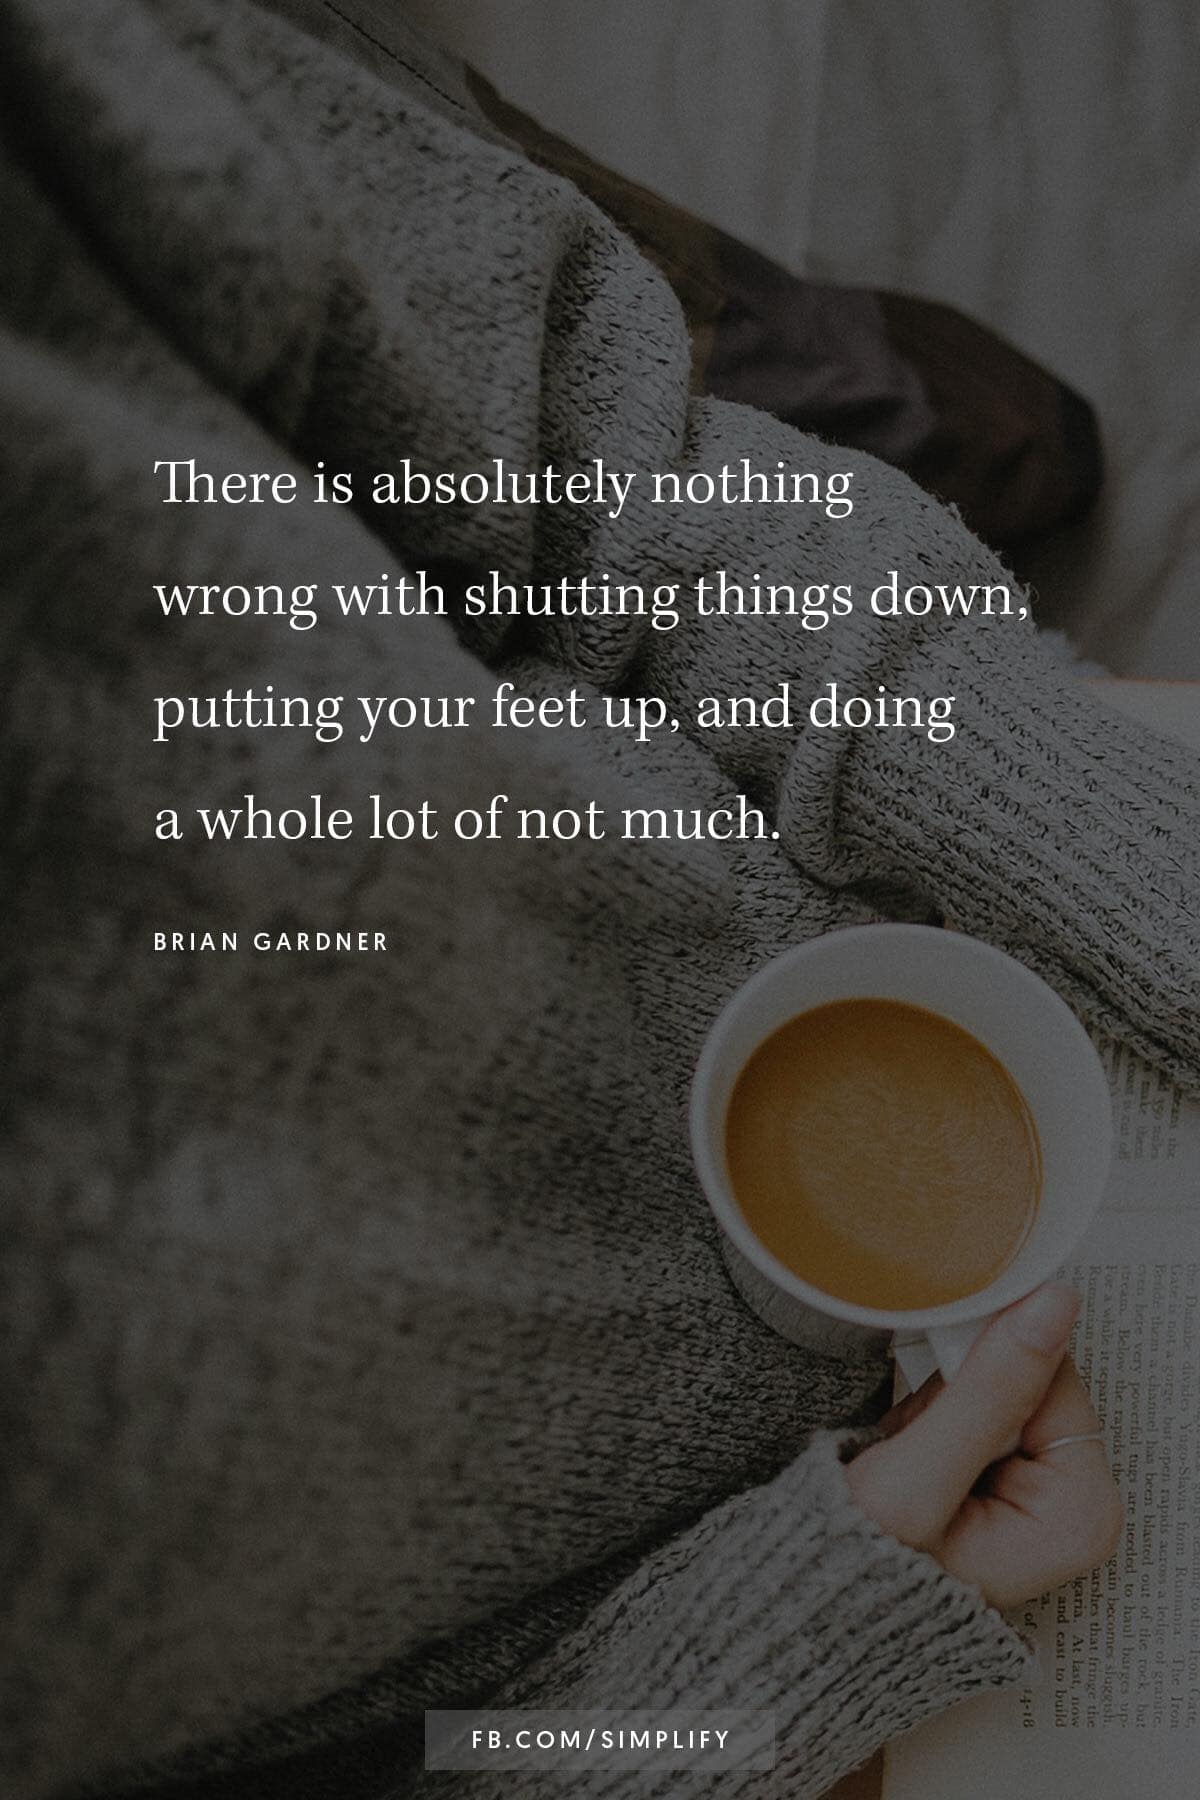 there is absolutely nothing wrong with shutting things down, putting your feet up, and doing a whole lot of not much